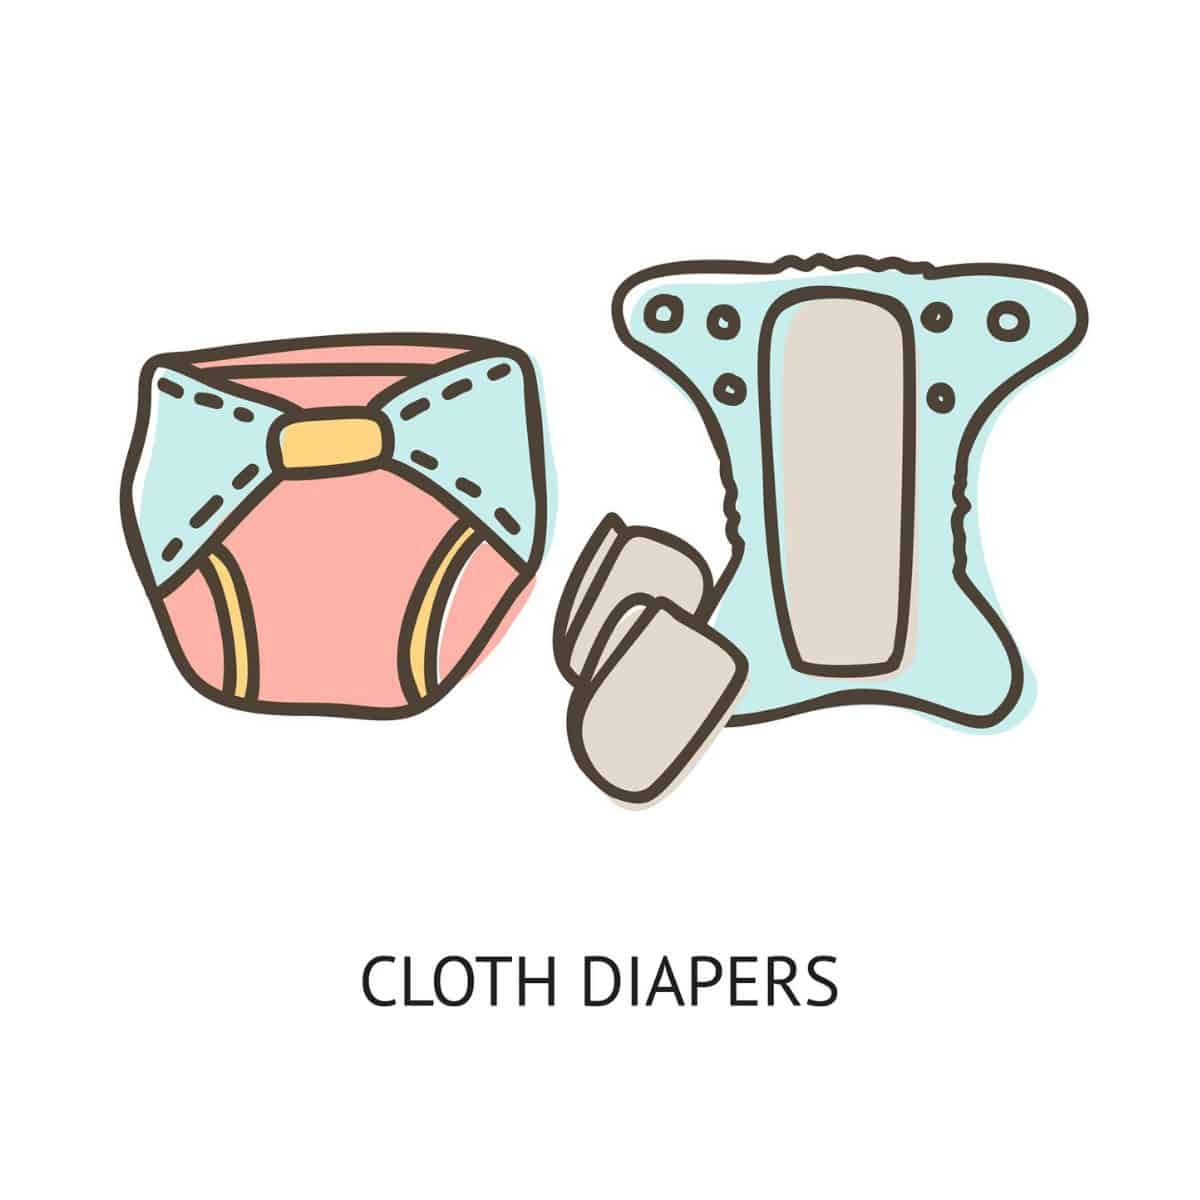 Illustration of cloth diapers.